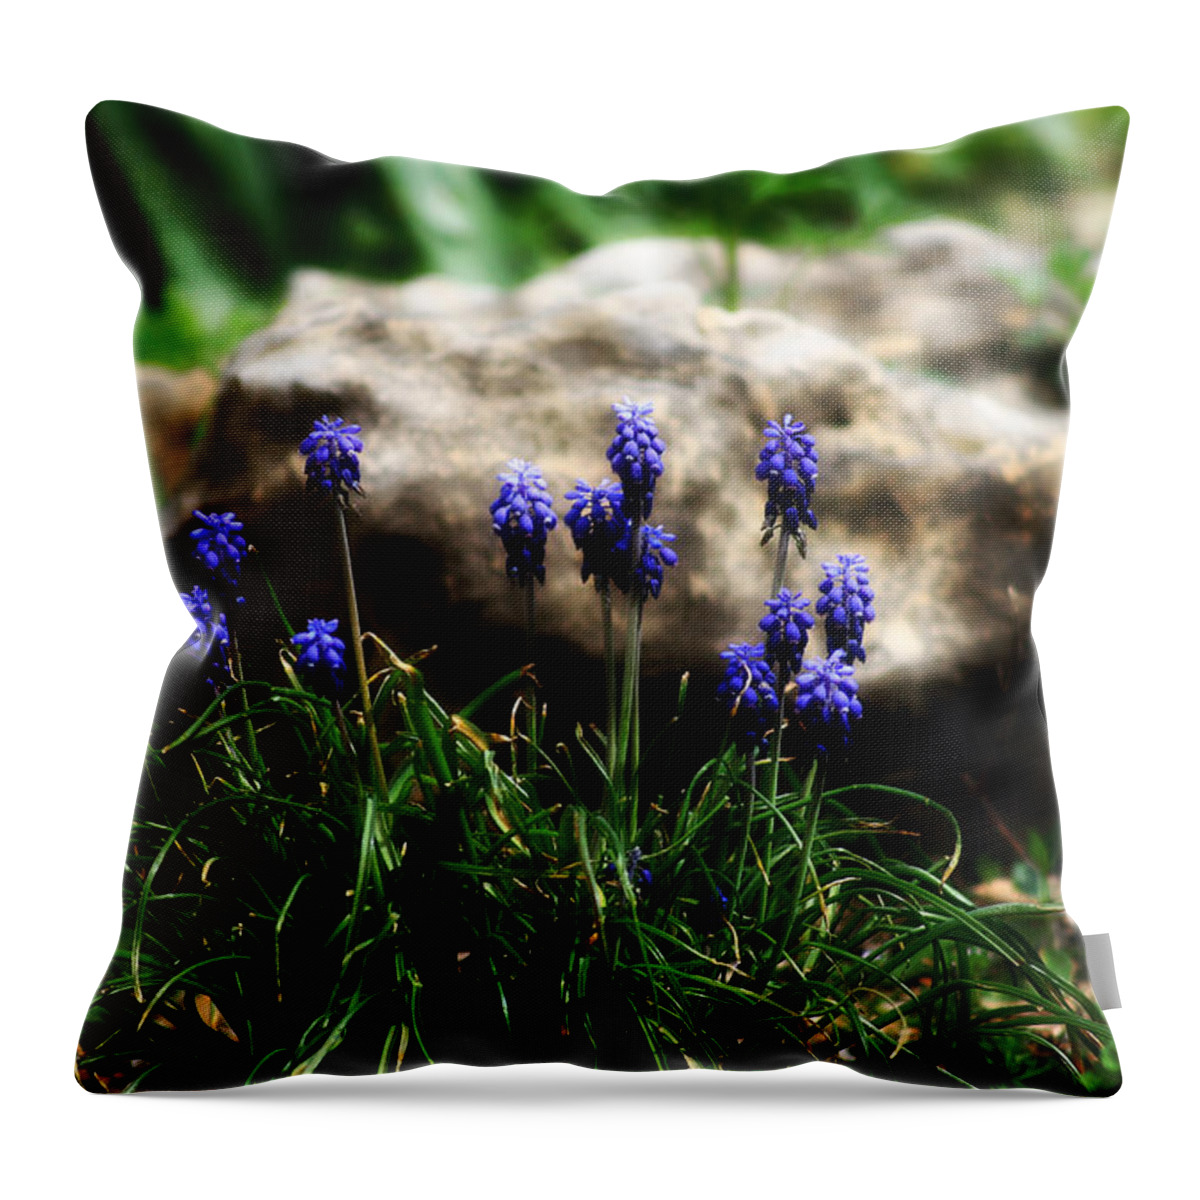 Flowers Throw Pillow featuring the photograph Bring on the purple by Toni Hopper